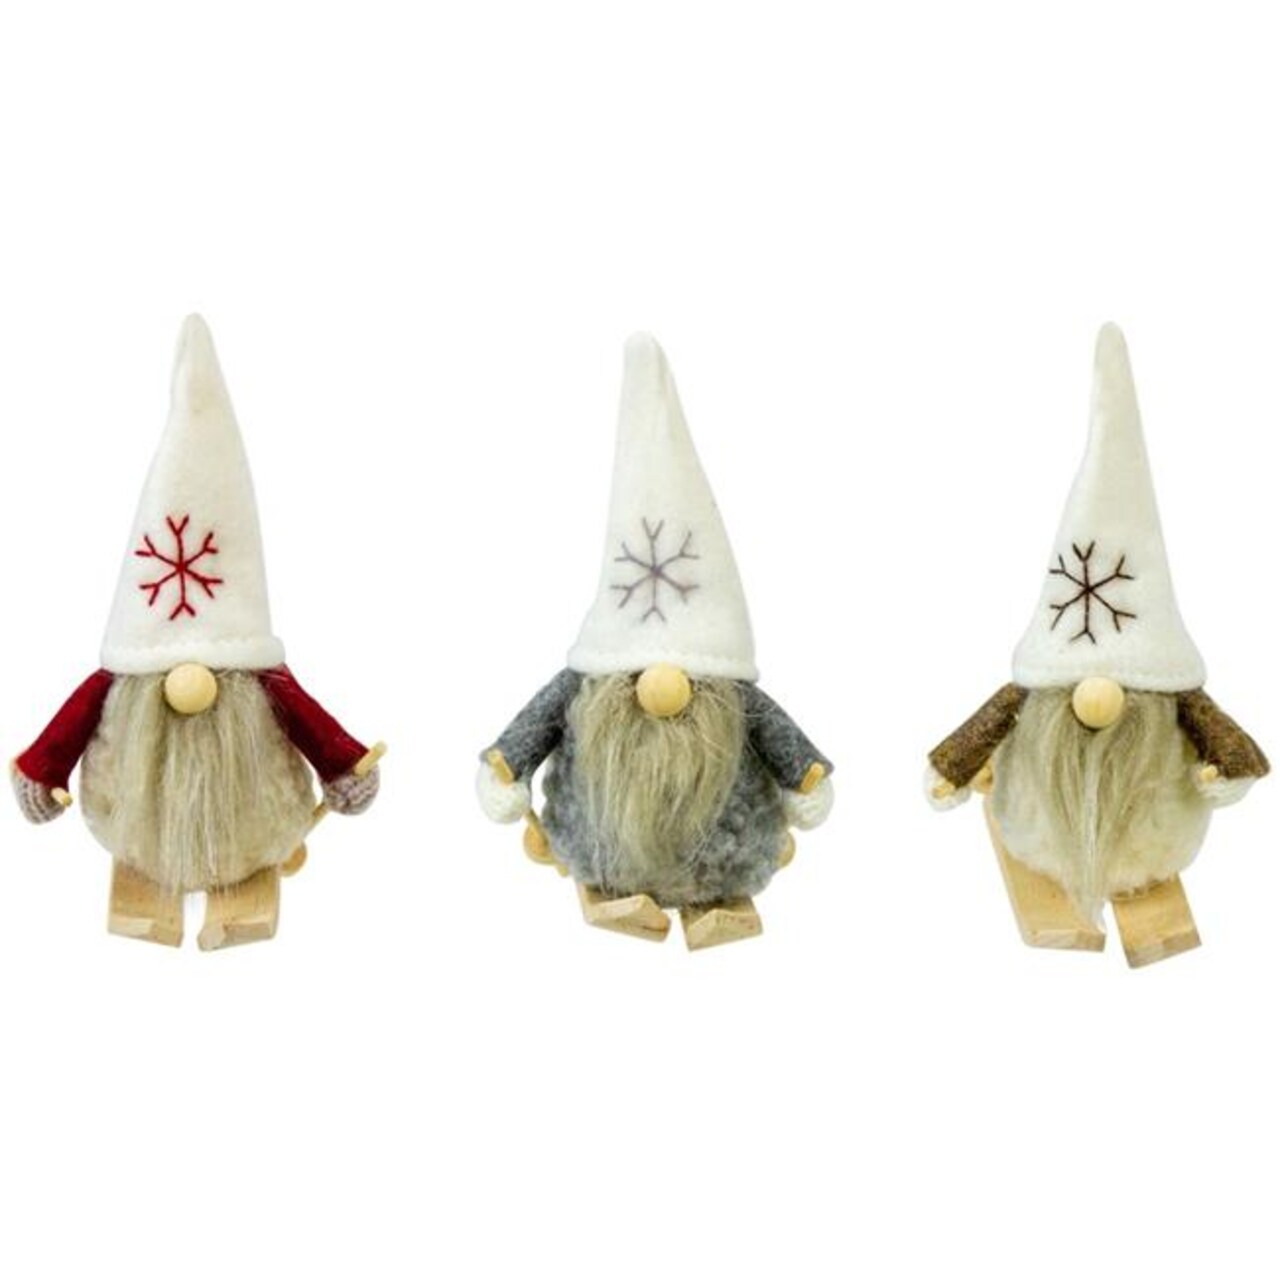 Northlight 34865031 4.5 in. Skiing Christmas Gnome Ornaments - Set of 3